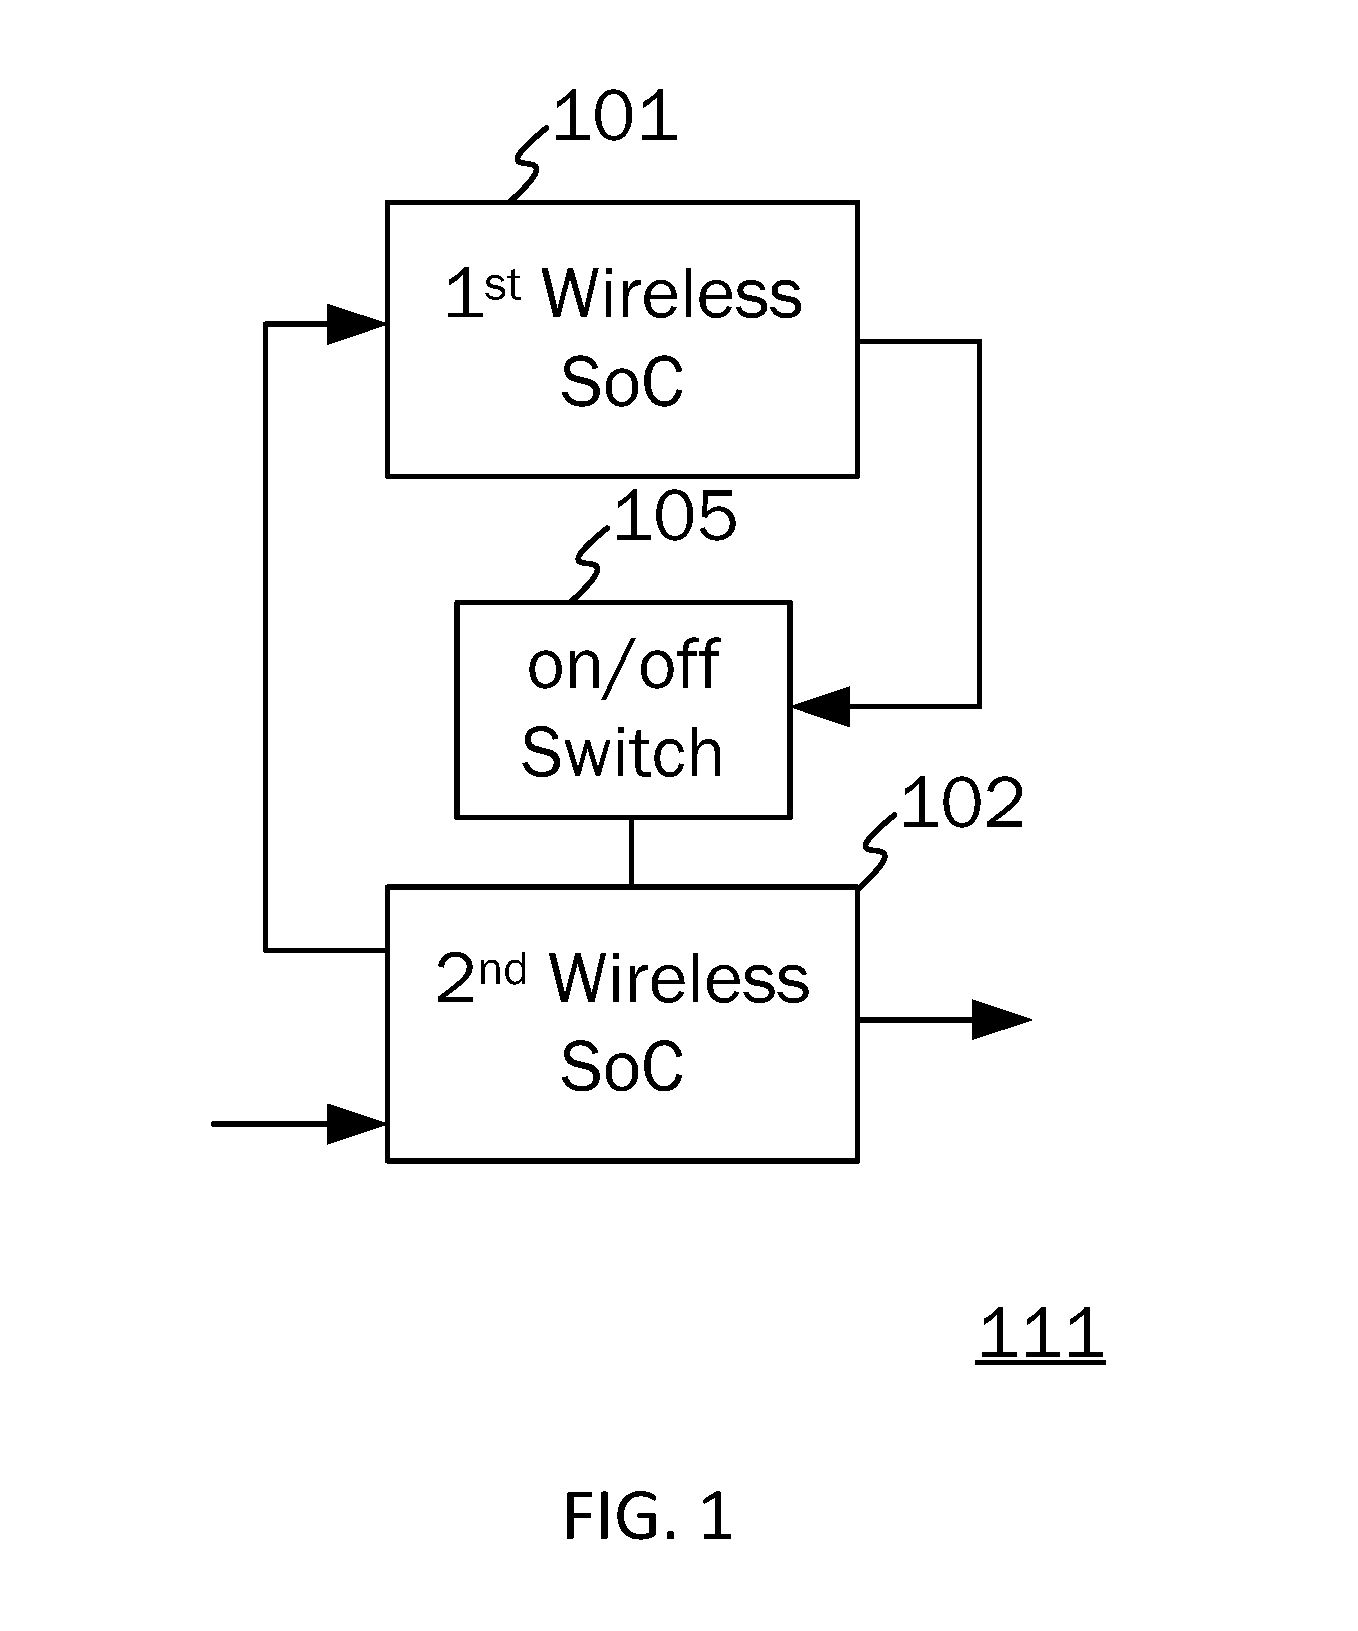 Cross-platform automated perimeter access control system and method adopting selective adapter